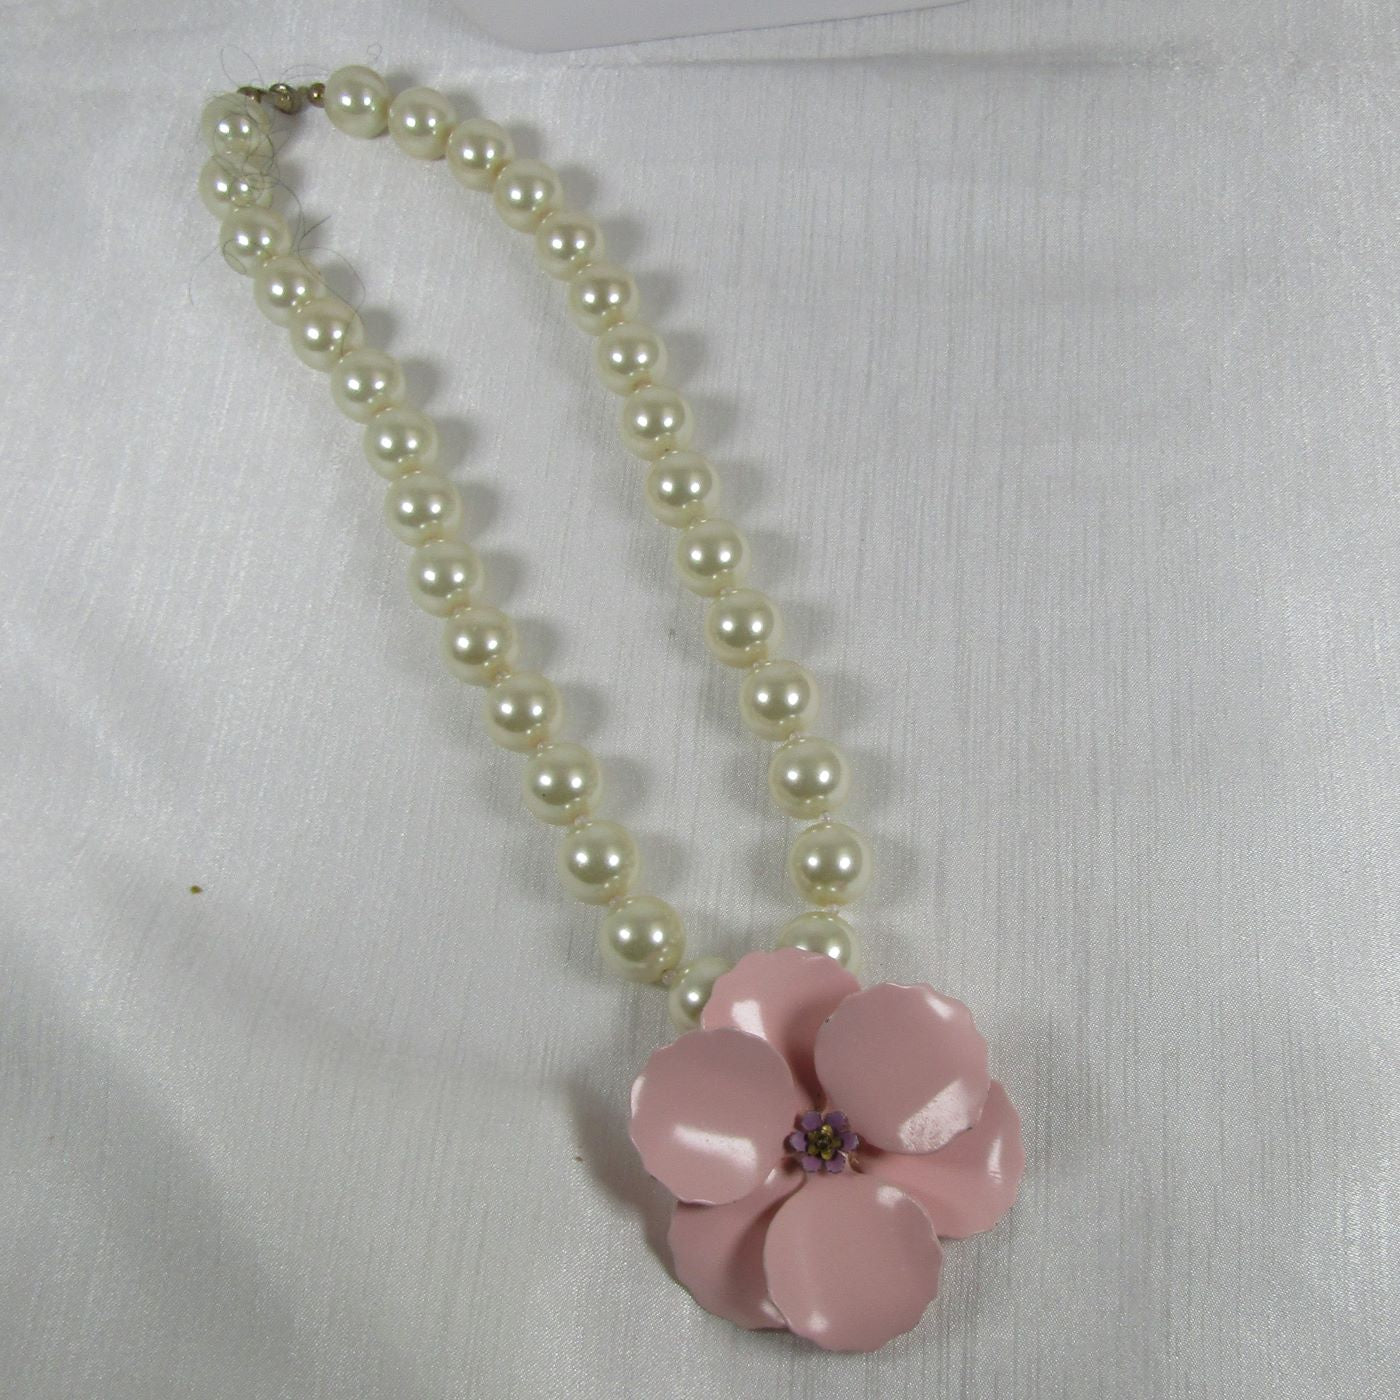 Poppy Green Pink Necklace Beads and Stainless Steel Picture Pendant